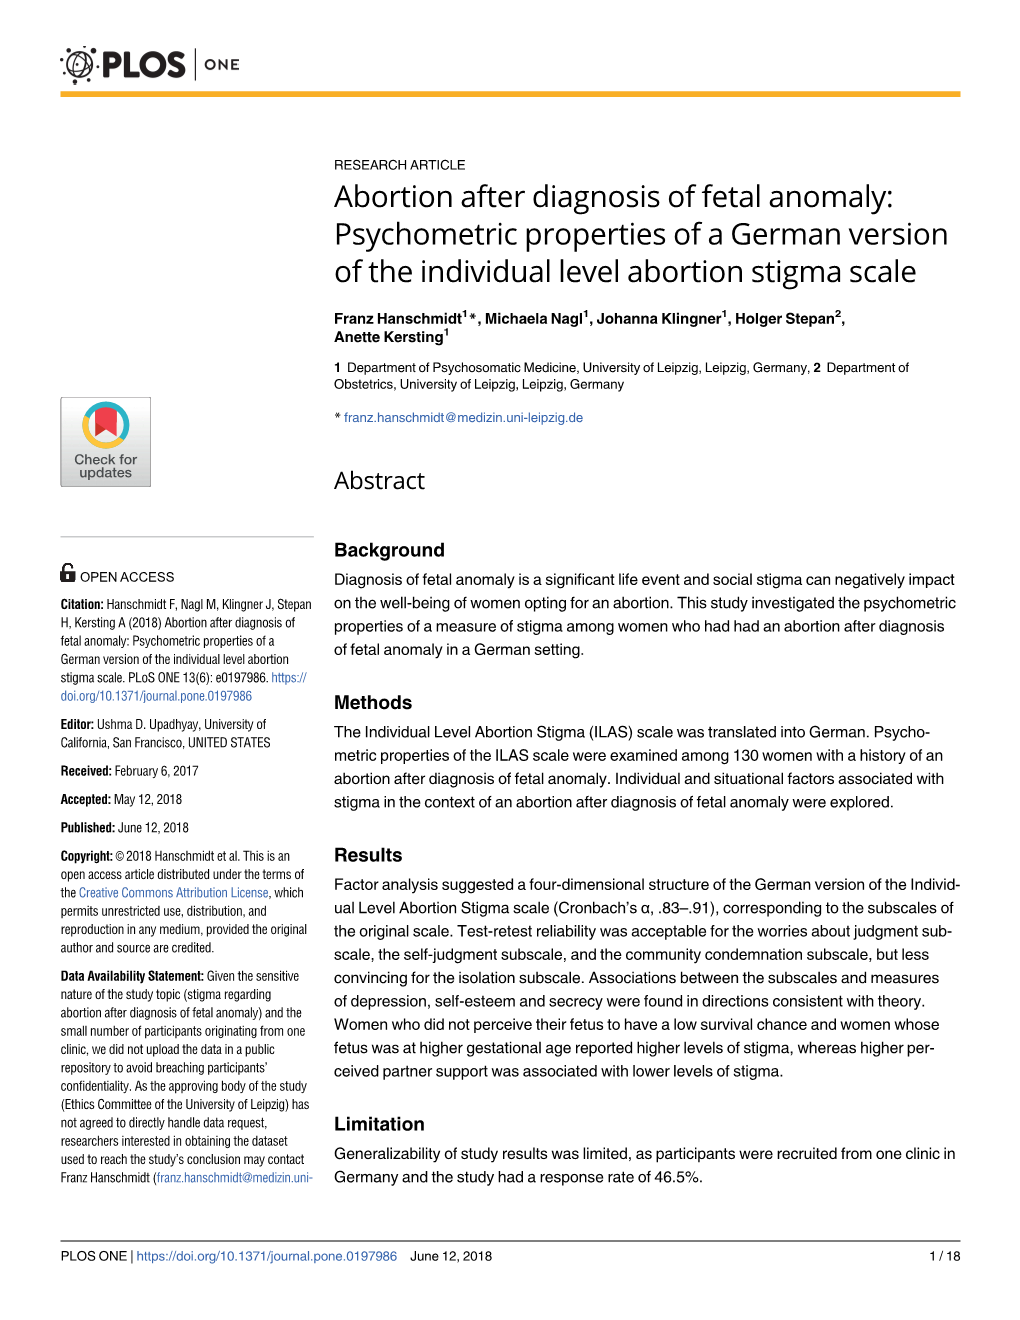 Abortion After Diagnosis of Fetal Anomaly: Psychometric Properties of a German Version of the Individual Level Abortion Stigma Scale